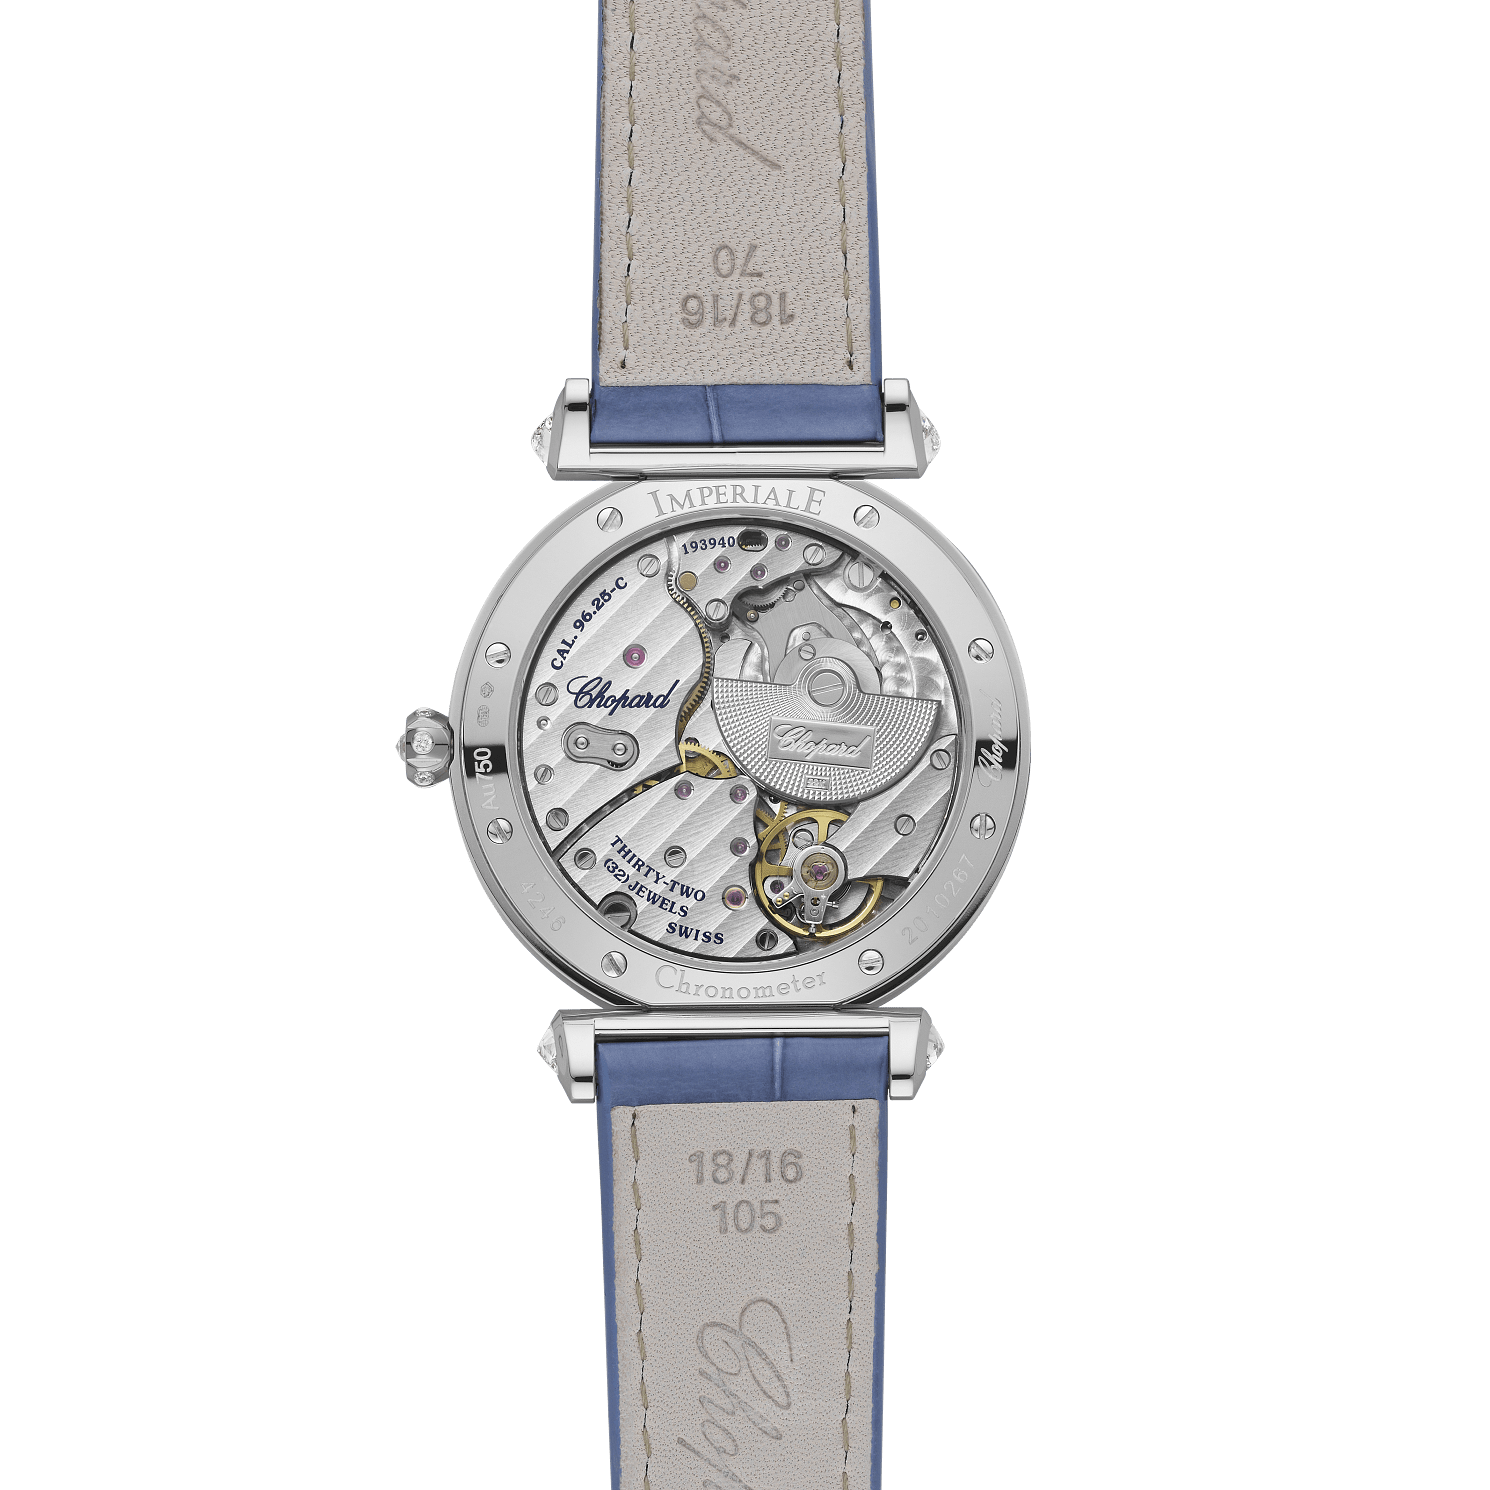 IMPERIALE Moonphase